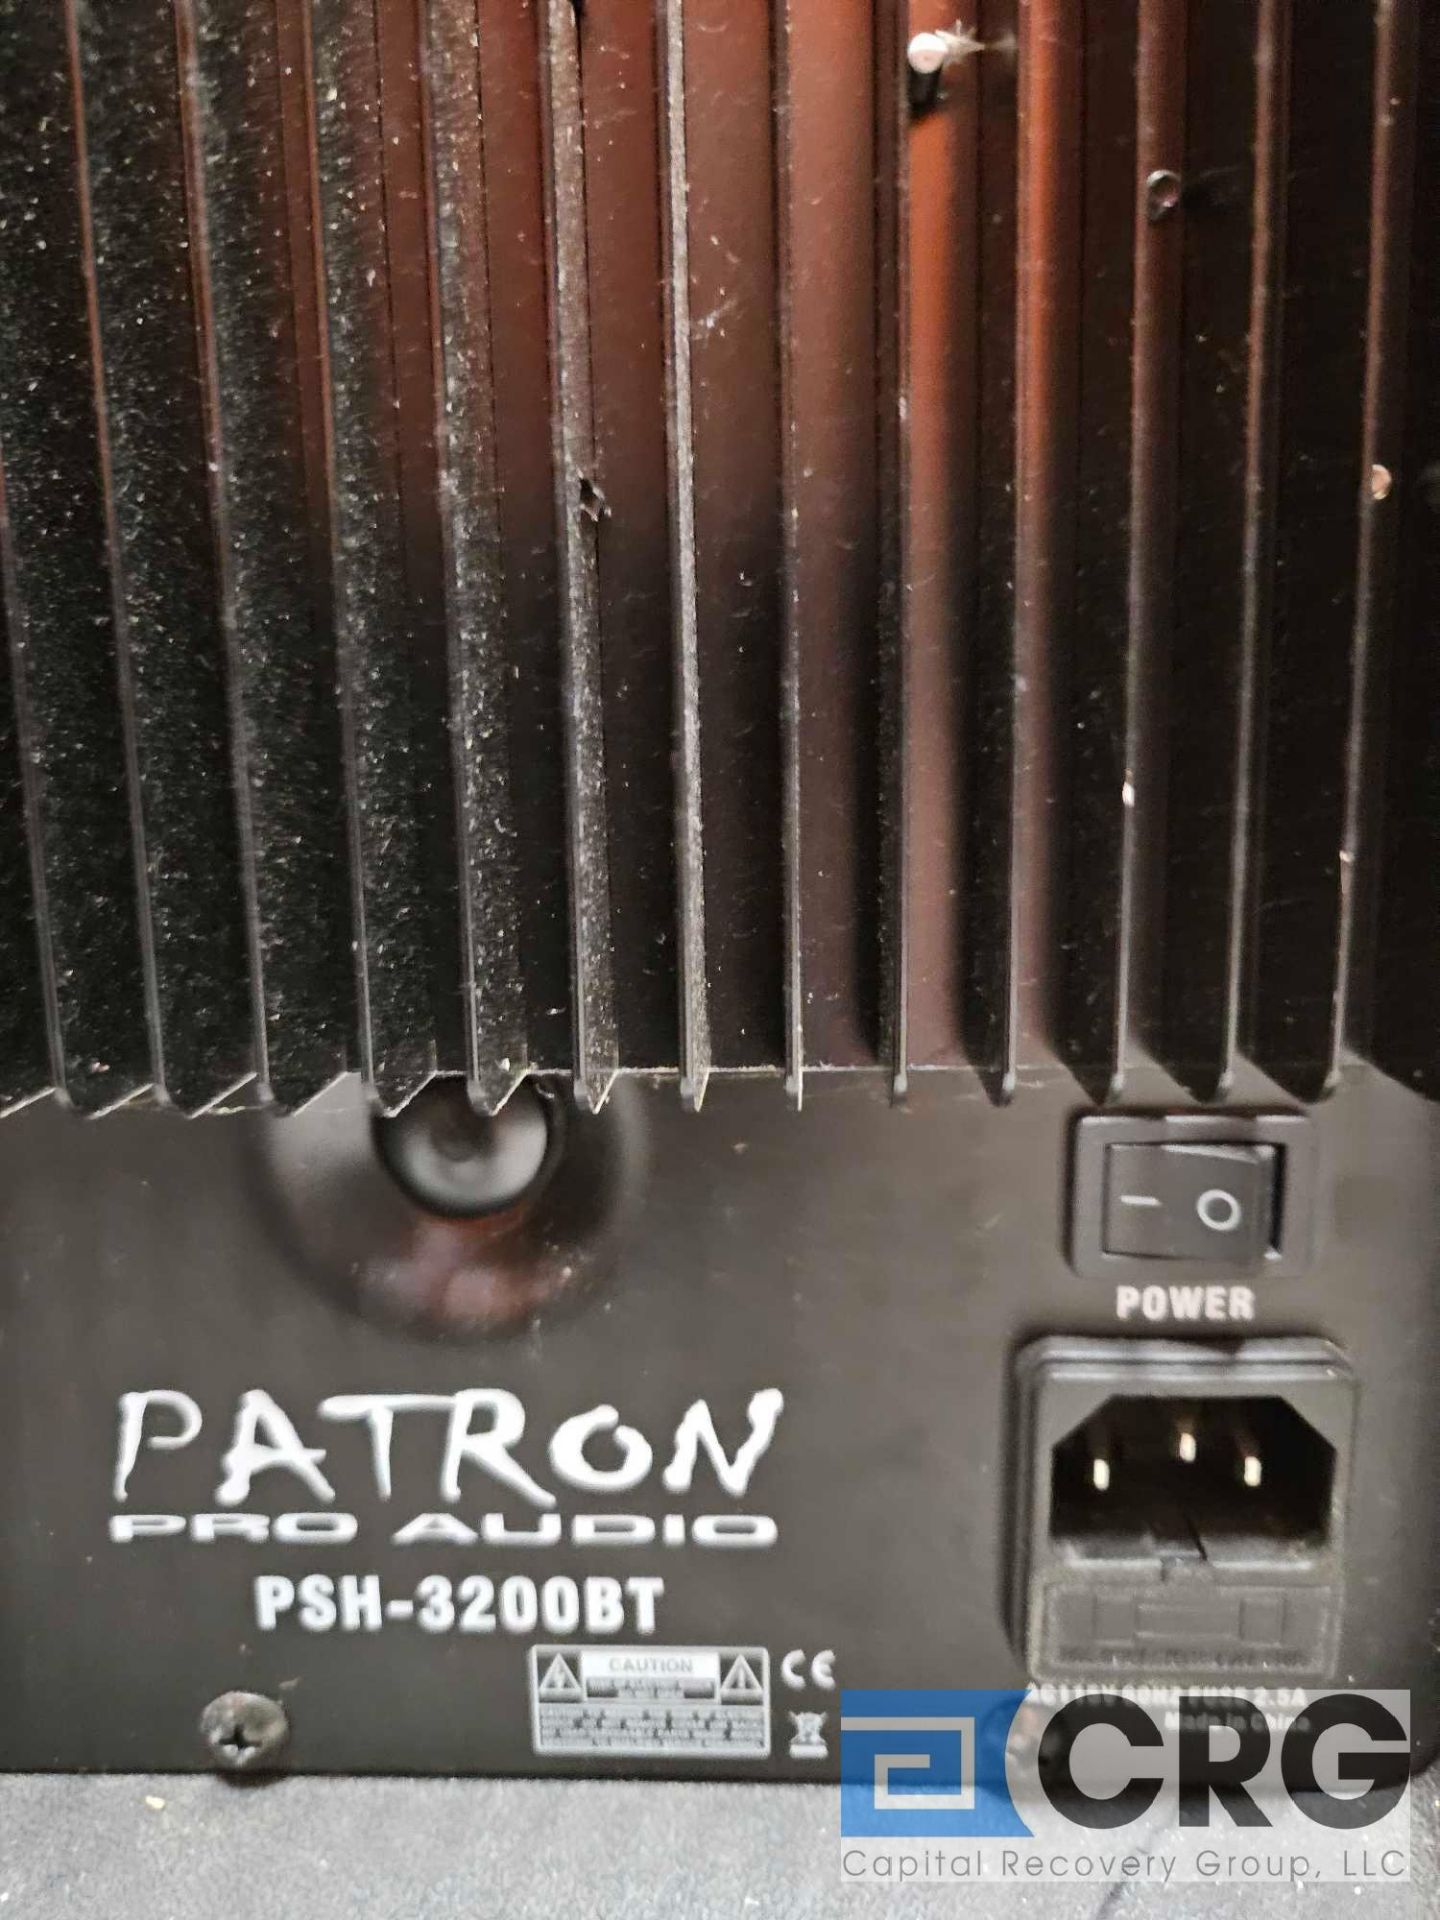 Patron Pro Portable Independent Speaker - Image 3 of 3